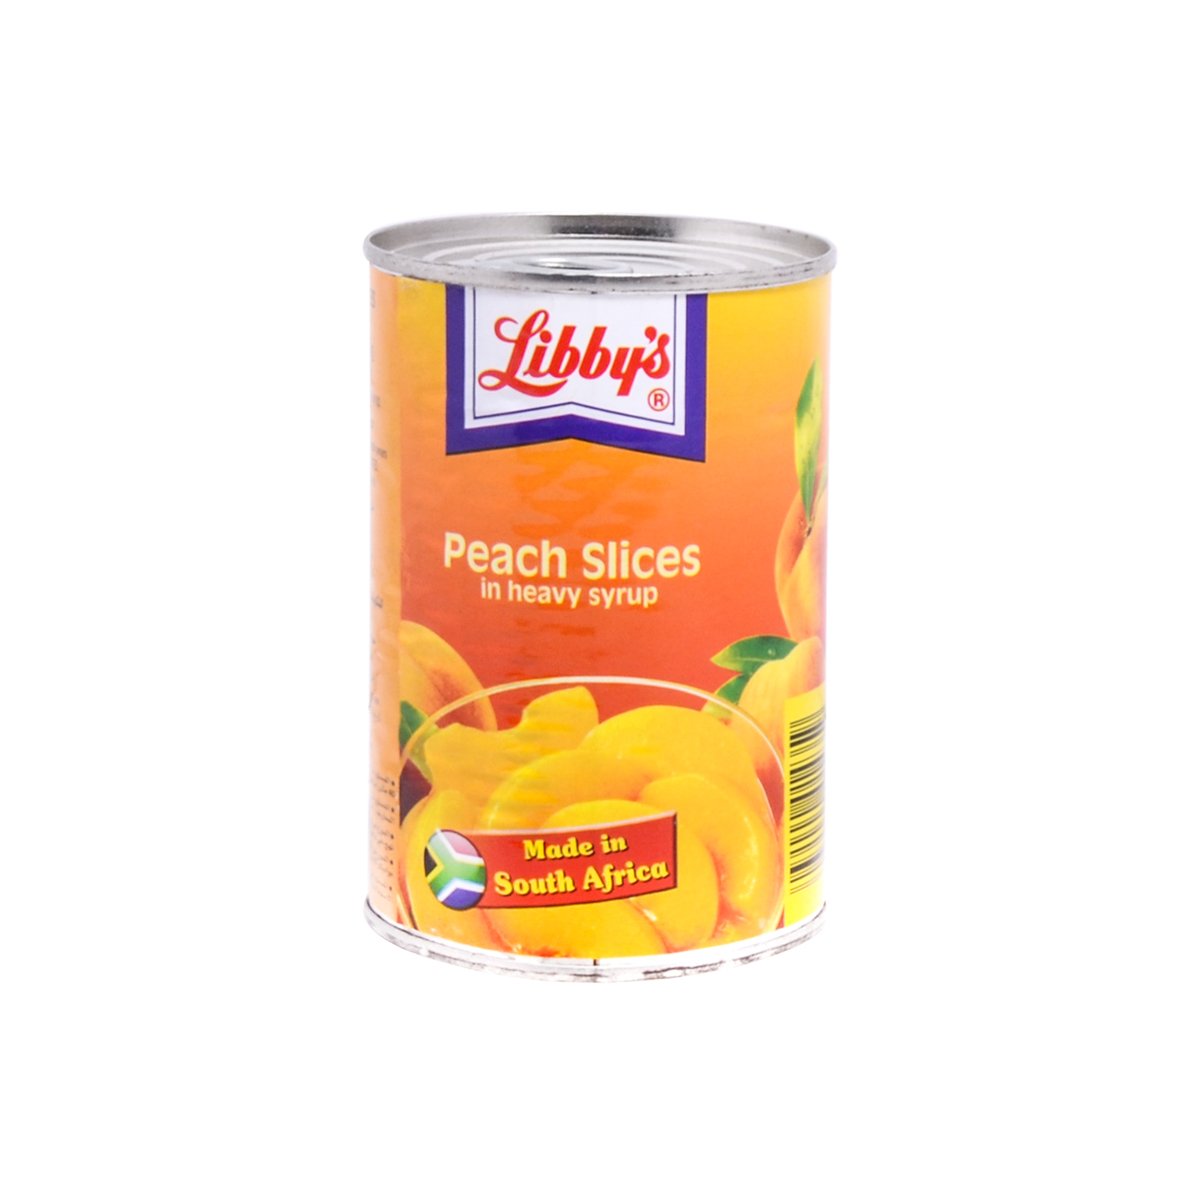 Libby's Peach Slices in Heavy Syrup 420 g